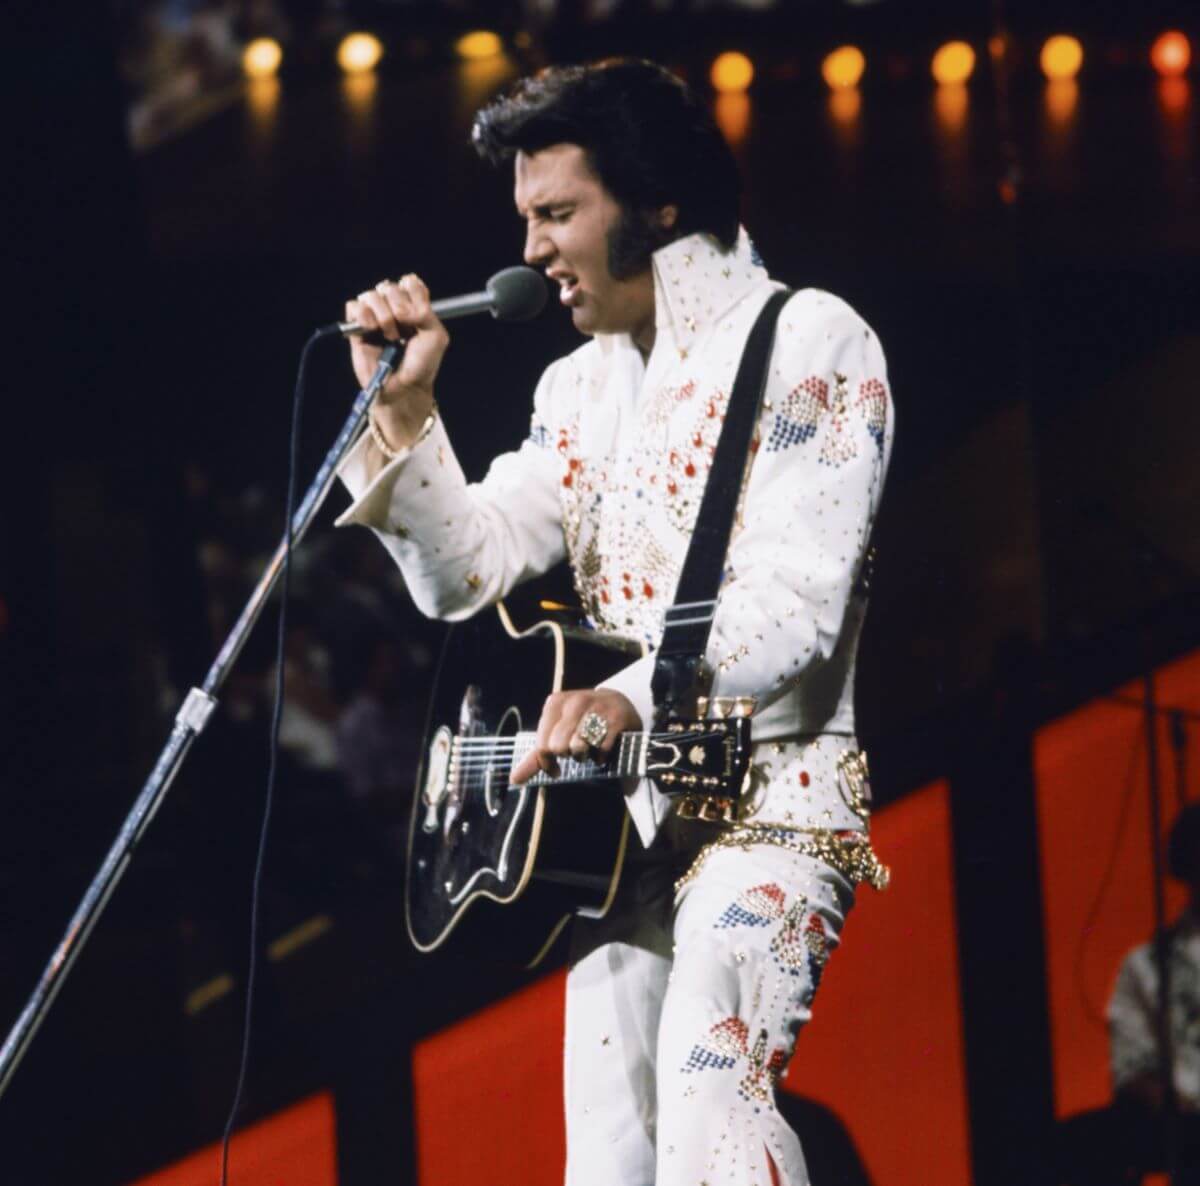 Elvis Presley wears a white jumpsuit and sings into a microphone. He has a guitar strapped to his chest.